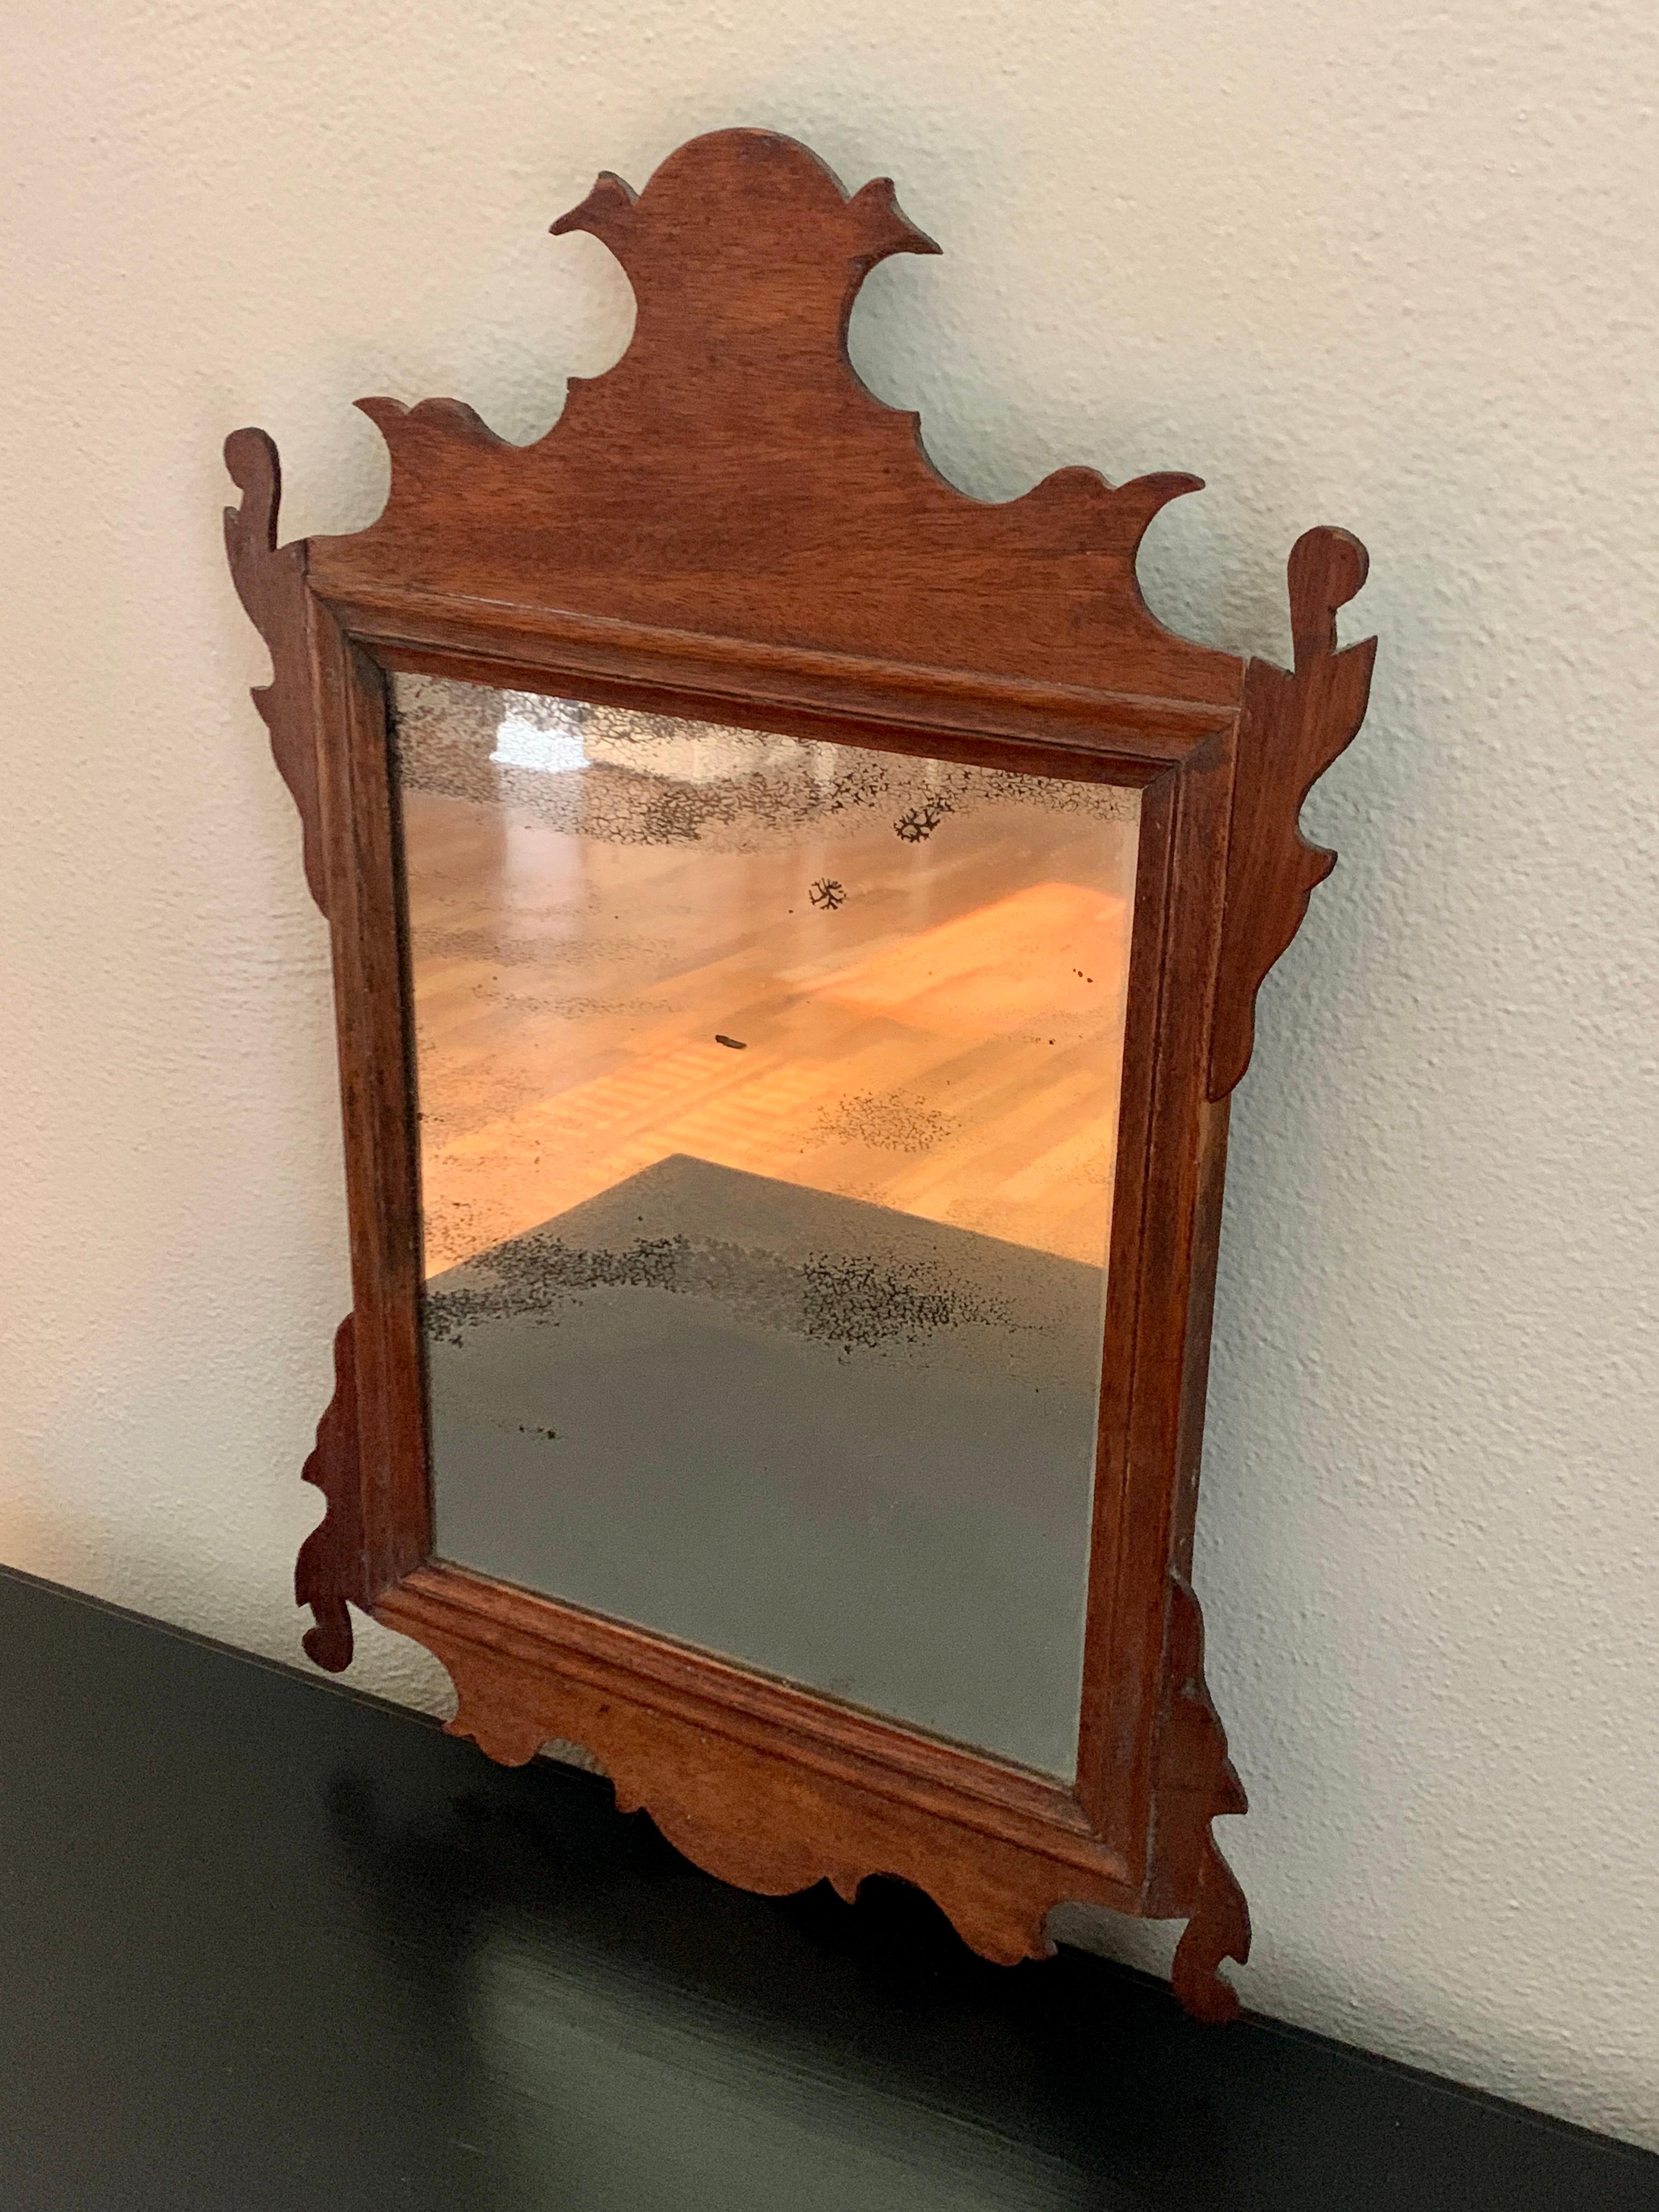 A stunning and rare antique American Chippendale wall mirror with tongue and groove corner joinery

USA, Circa 1760s

Hand carved mahogany, with antique mirror.

Measures: 11.63